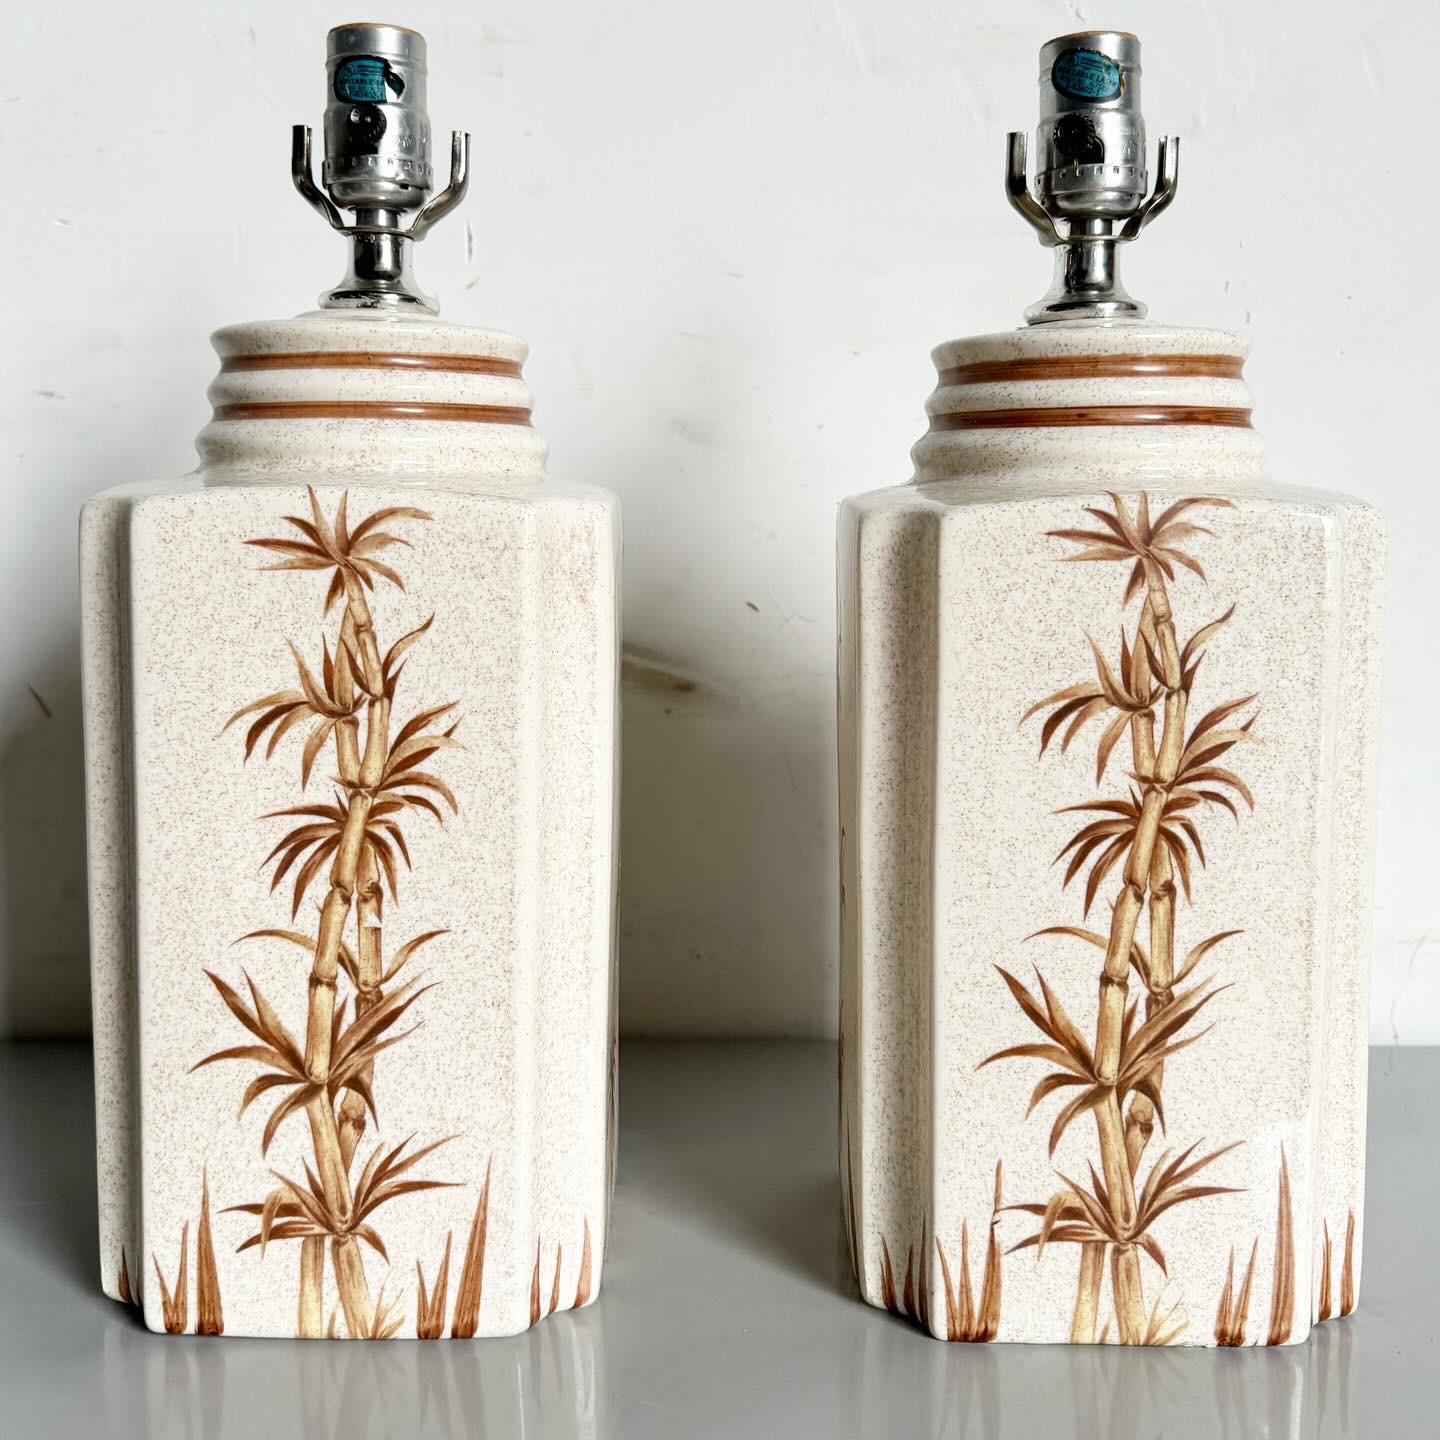 Illuminate your space with the Boho Chic Regency Ceramic Table Lamps, featuring hand-painted bamboo plants. These lamps blend Bohemian and Regency styles with their delicate bamboo motifs on a ceramic base, offering a serene and sophisticated touch.